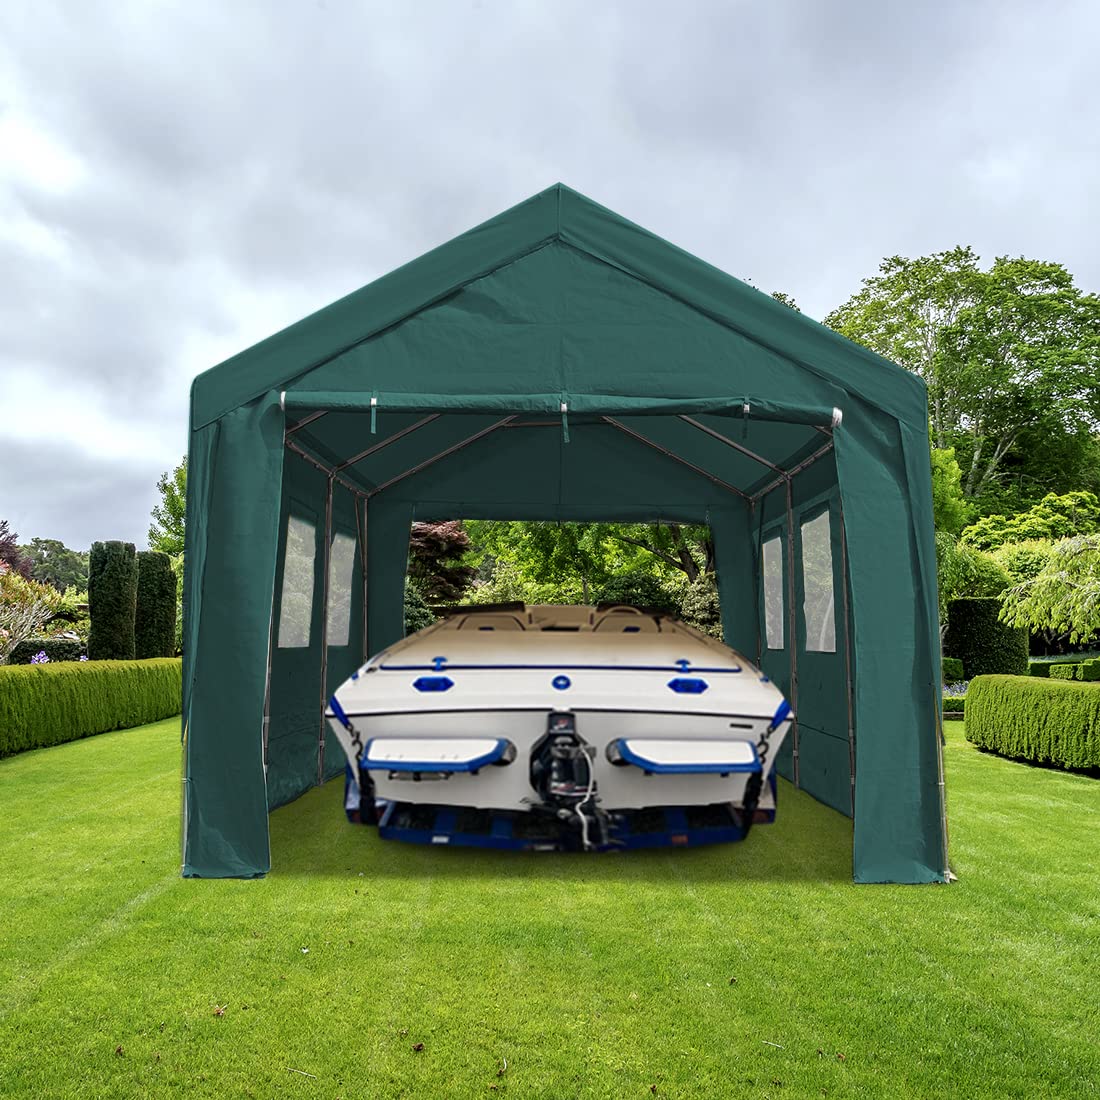 ADVANCE OUTDOOR 12x20 ft Heavy Duty Adjustable Carport with 6 Roll-up Ventilated Windows & Removable Sidewalls Car Canopy Garage Boat Shelter Party Tent, Peak Height from 9.5ft to 11ft, Green (020G) 12'x20'